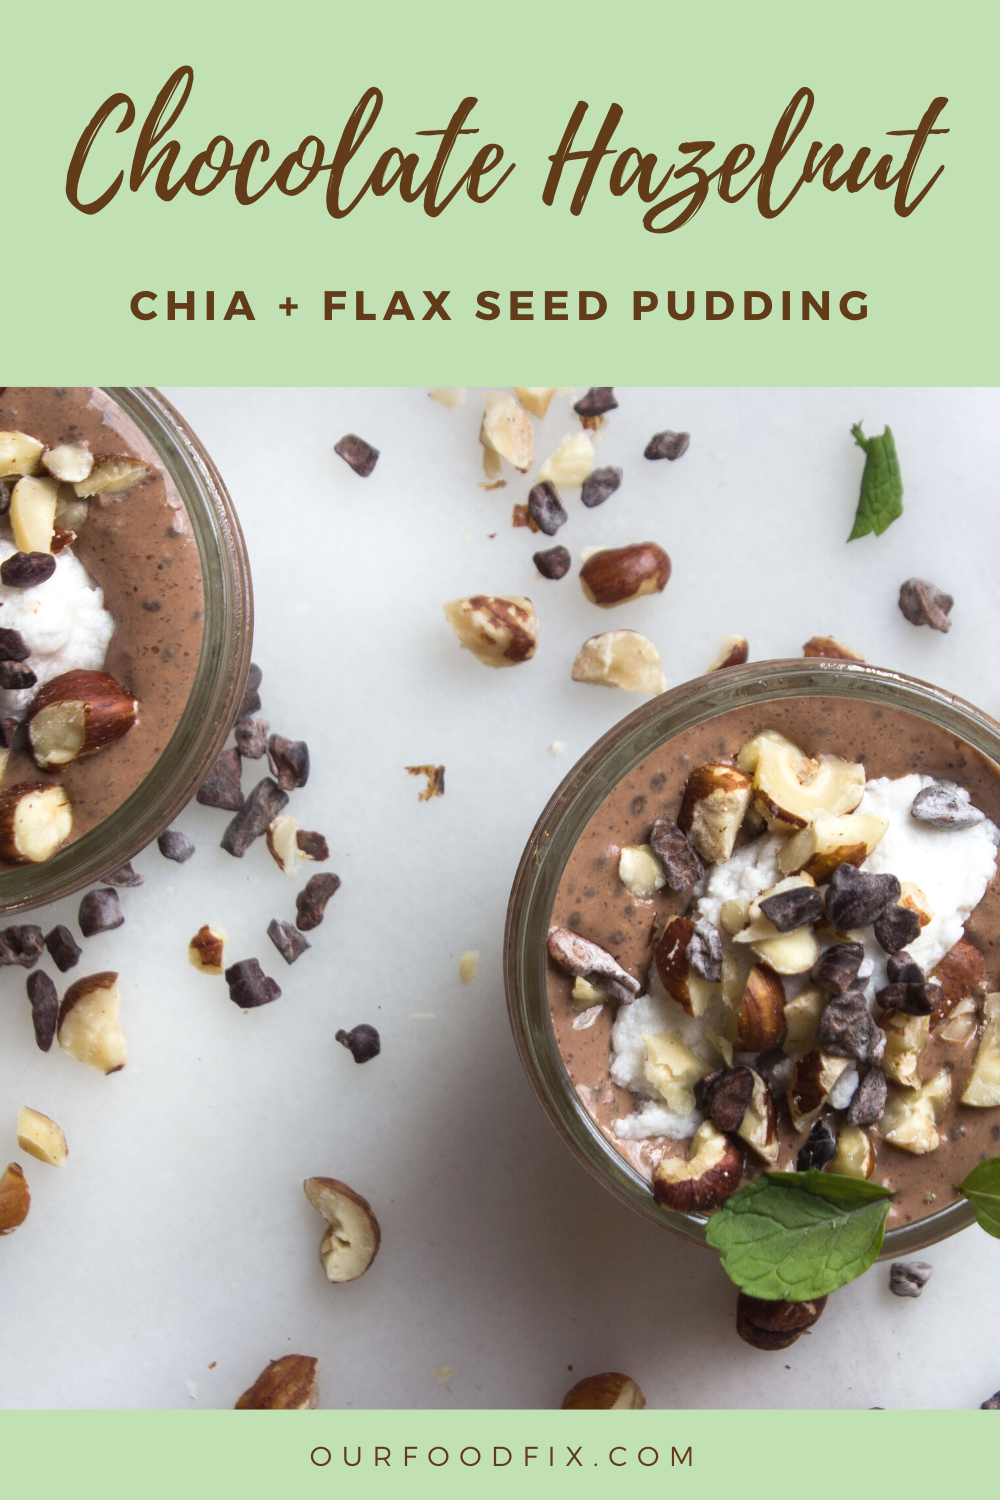 Enjoy the delectable combination of chocolate + hazelnut any time of day, thanks to a few simple healthy ingredients in this satisfying snack. #PaleoRecipes #ChiaSeedPudding #PlantBased | Paleo recipes | Paleo snack | Paleo treat | Chocolate Hazelnut | Chia Seed Pudding | Make ahead recipe | Keto recipe | Vegan recipe | Chocolate recipe | Easy recipe | Superfoods